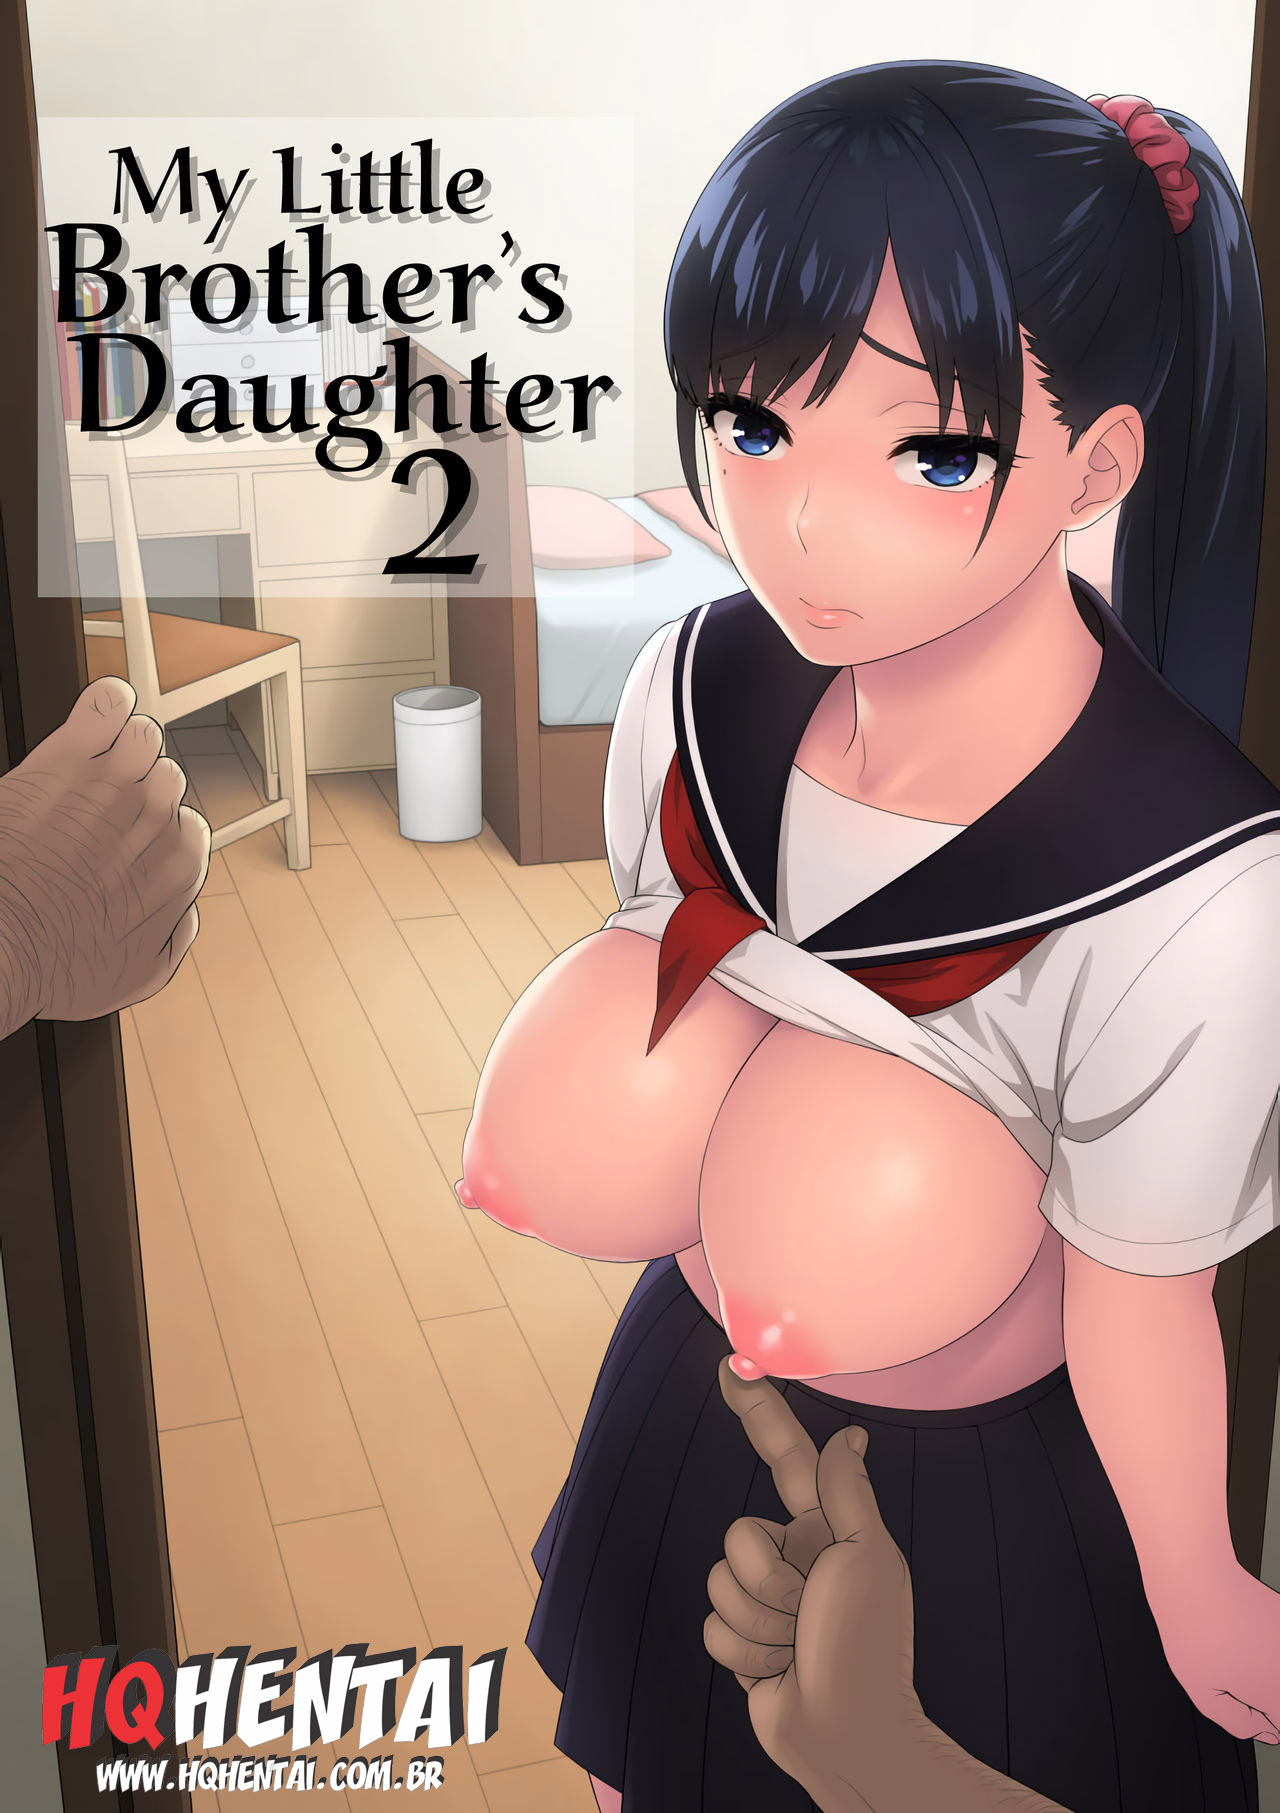 Otouto no Musume 2 | My Little Brother’s Daughter 2